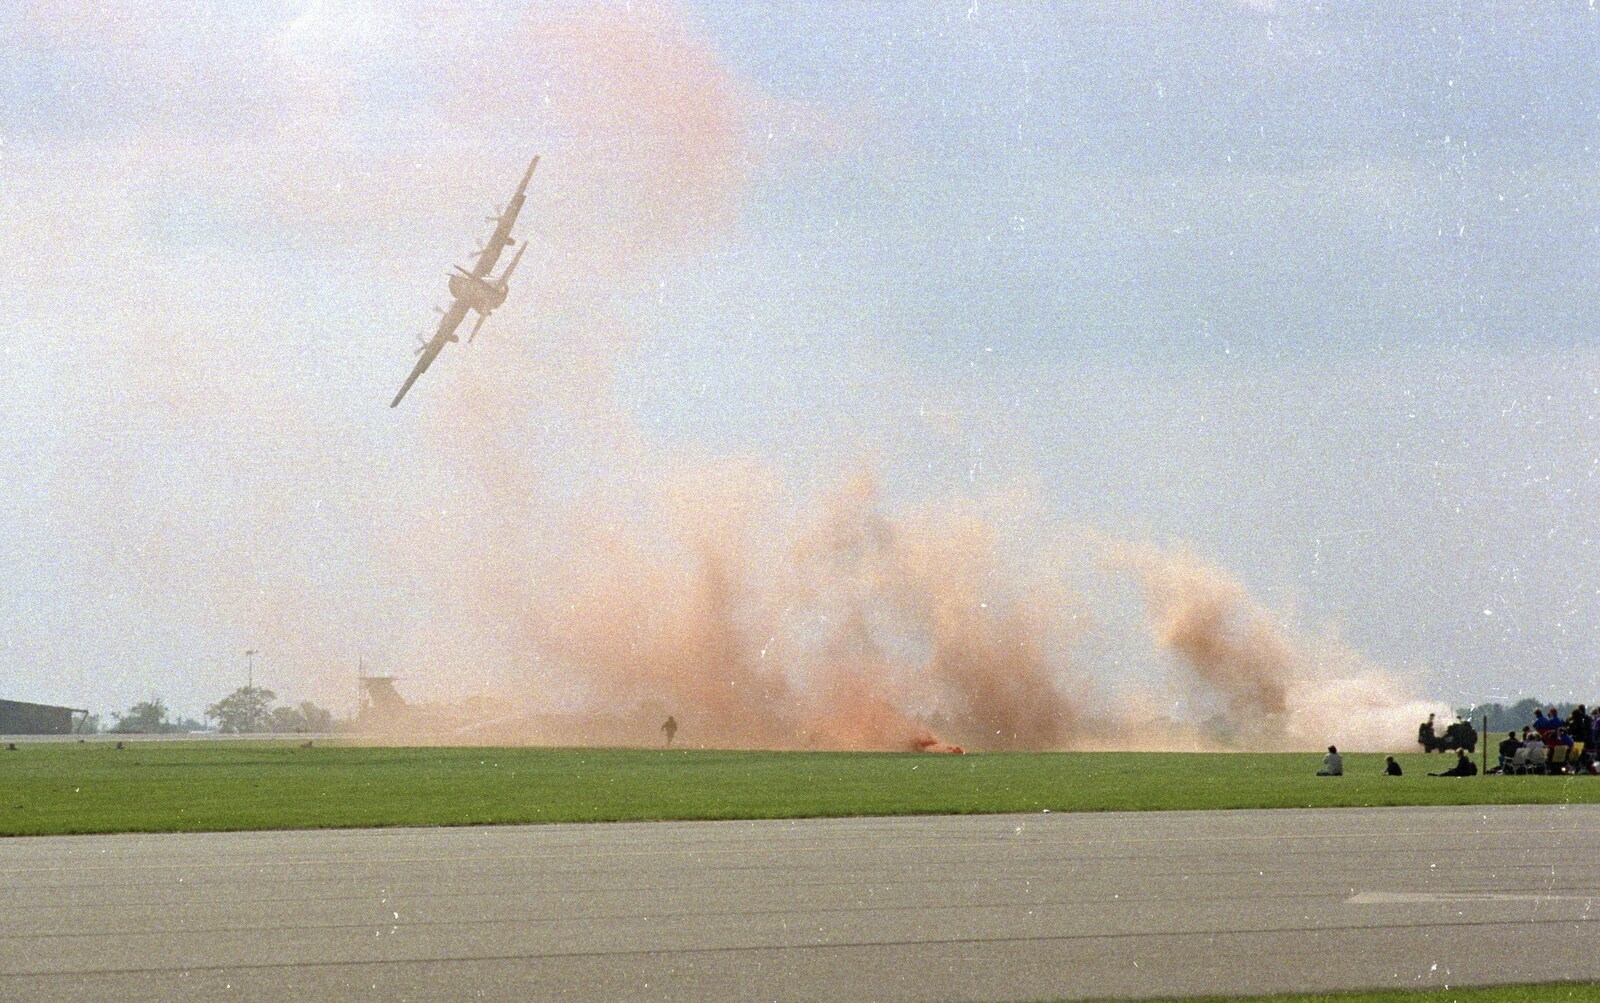 A simulated warzone touch-and-go from a C130 from The Mildenhall Air Fete, Mildenhall, Suffolk - 29th May 1994